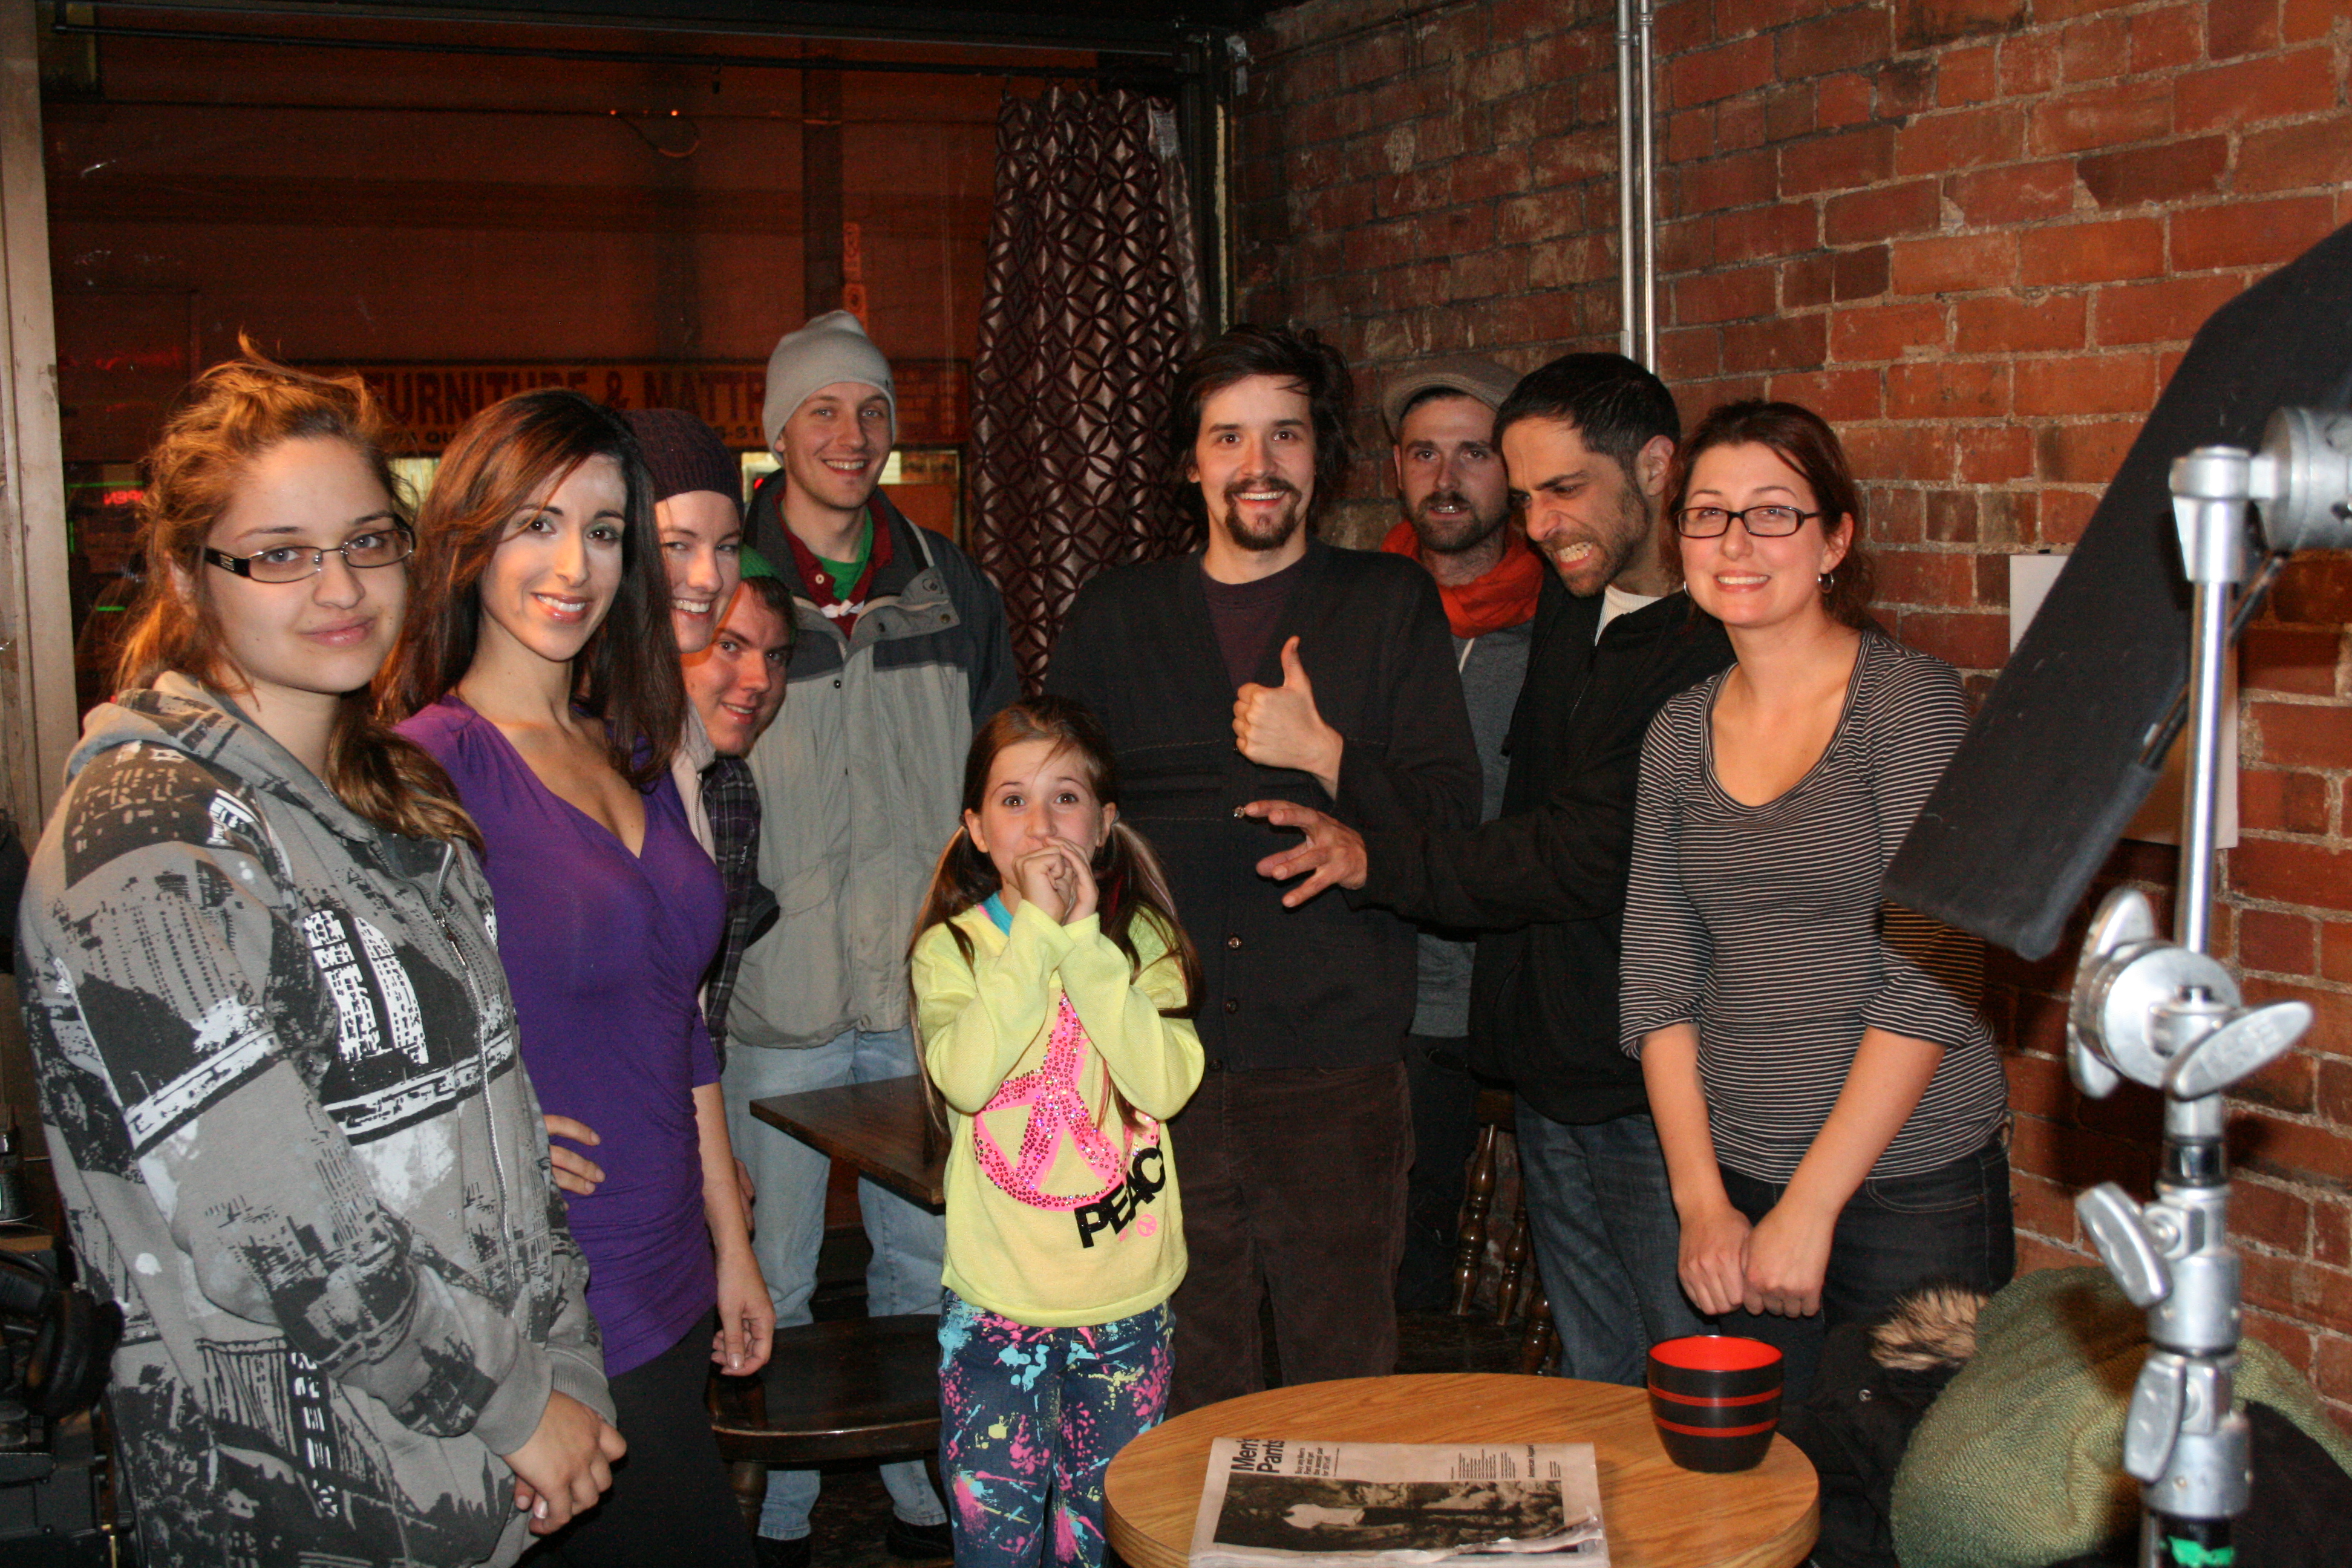 A pic with the A DAY IN THE LIFE OF DEATH cast and crew.